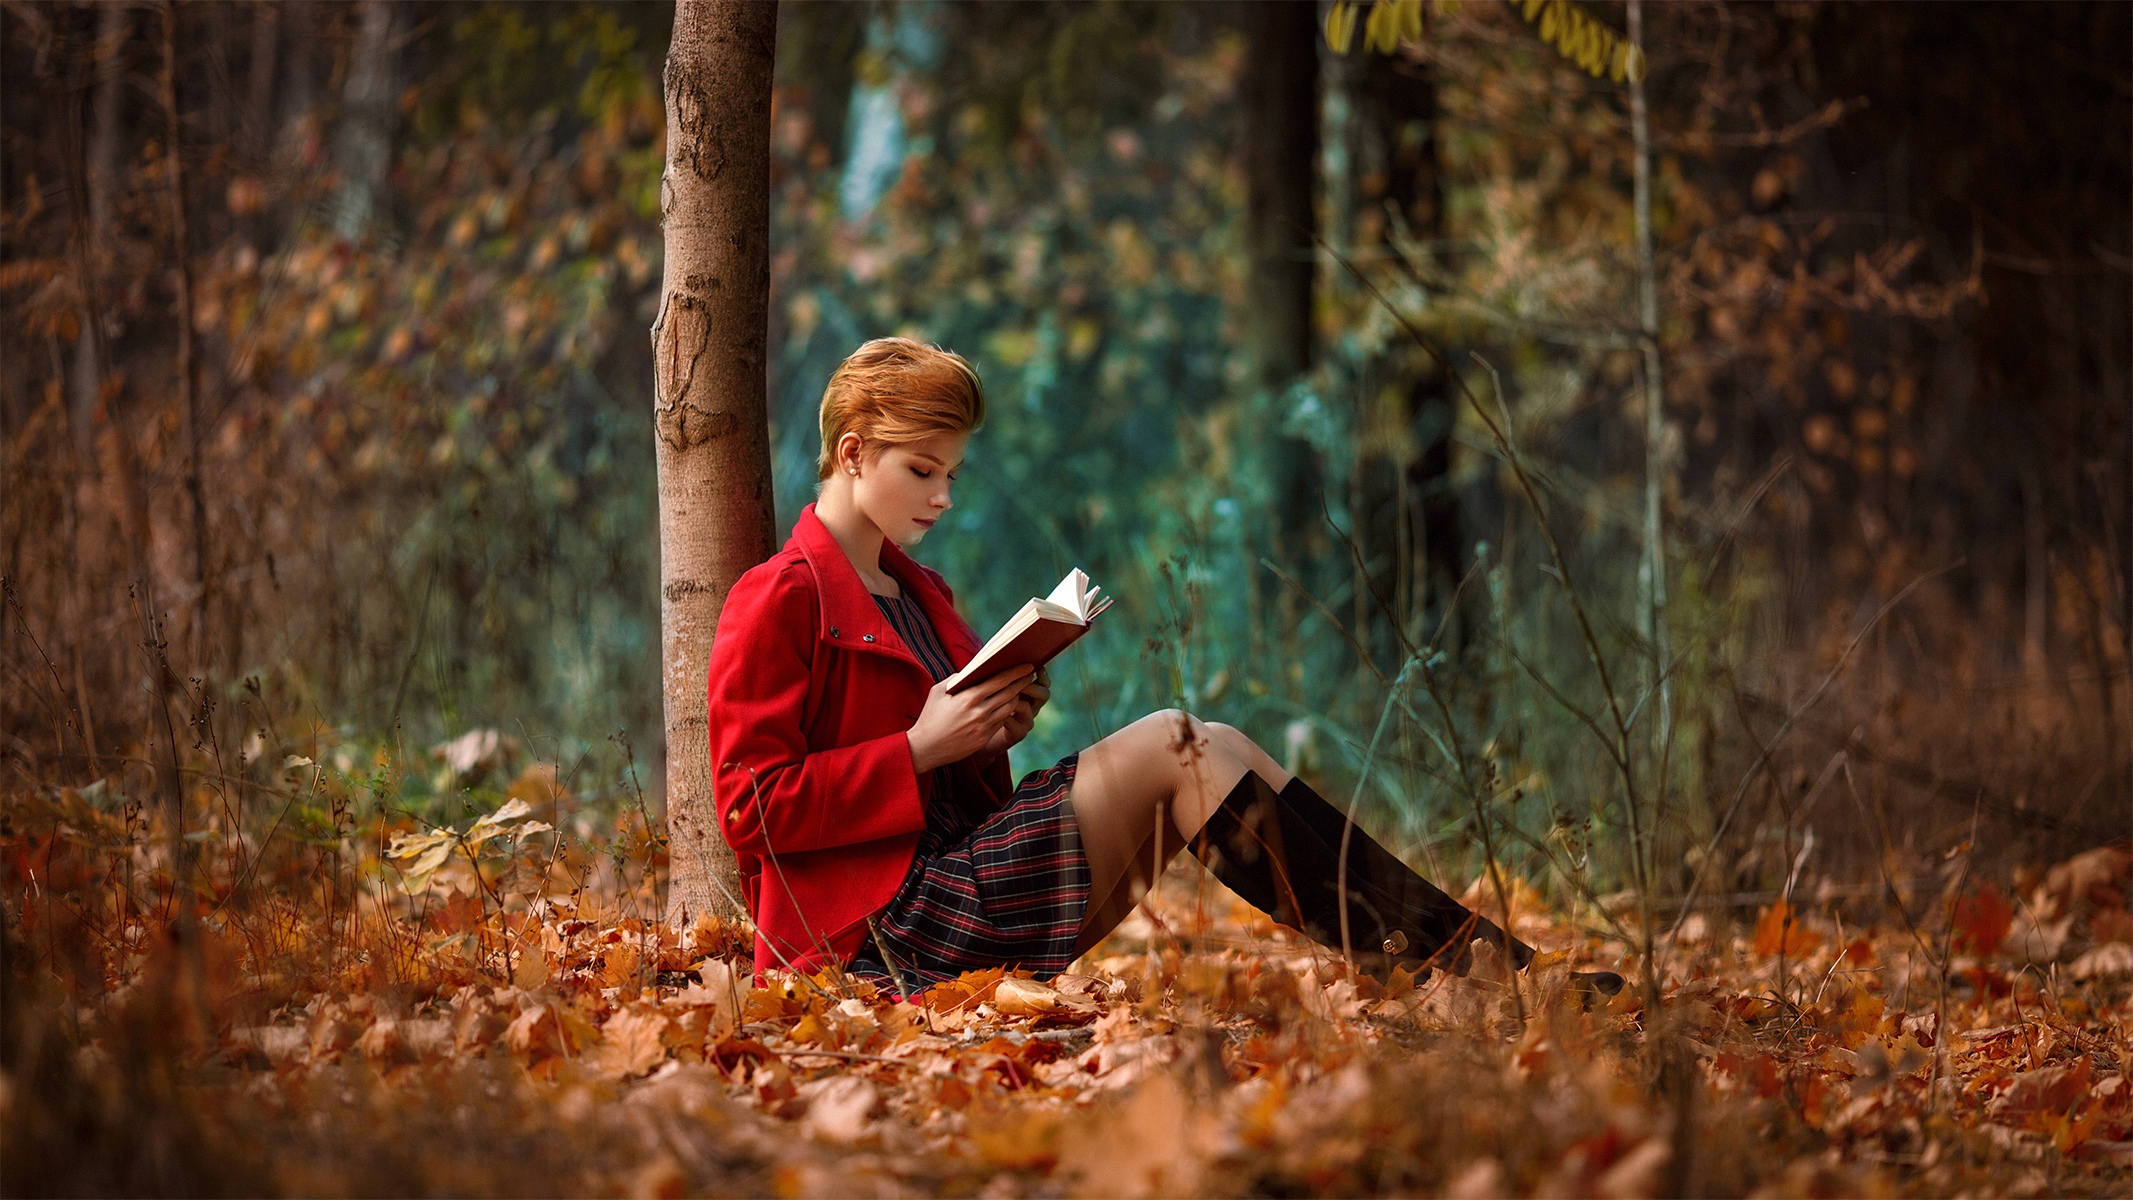 People 2133x1200 Anastasia Zhilina women model redhead reading books pearl earrings coats red coat dress boots sitting on the floor forest nature bokeh depth of field trees leaves fall outdoors profile women outdoors short hair